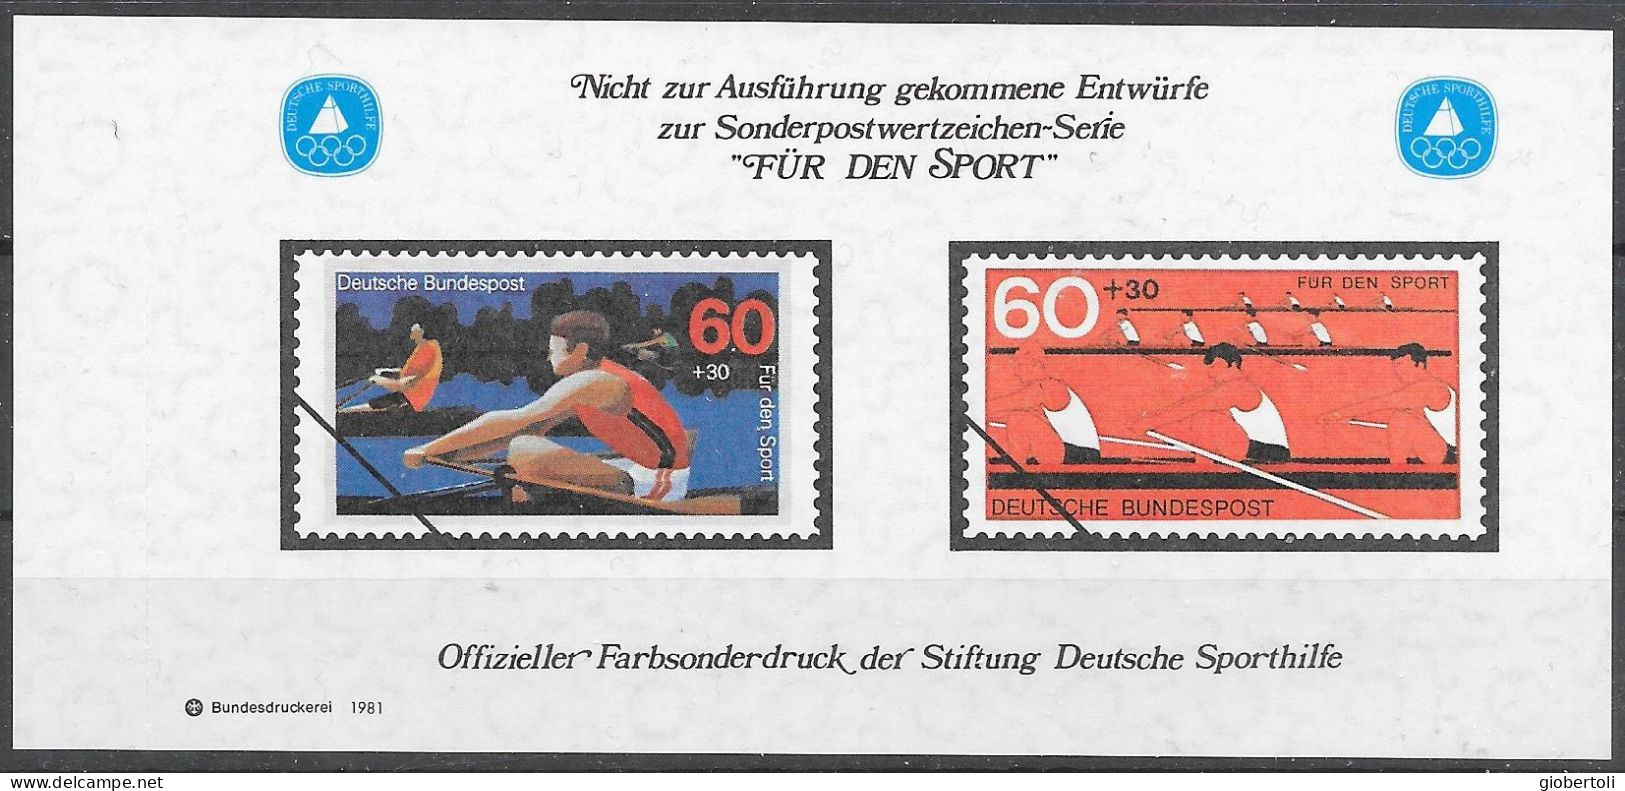 Germania/Germany/Allemagne: Bozzetti Non Adottati, Sketches Not Adopted, Croquis Non Adoptés, Per Lo Sport, For Sport, - Rudersport